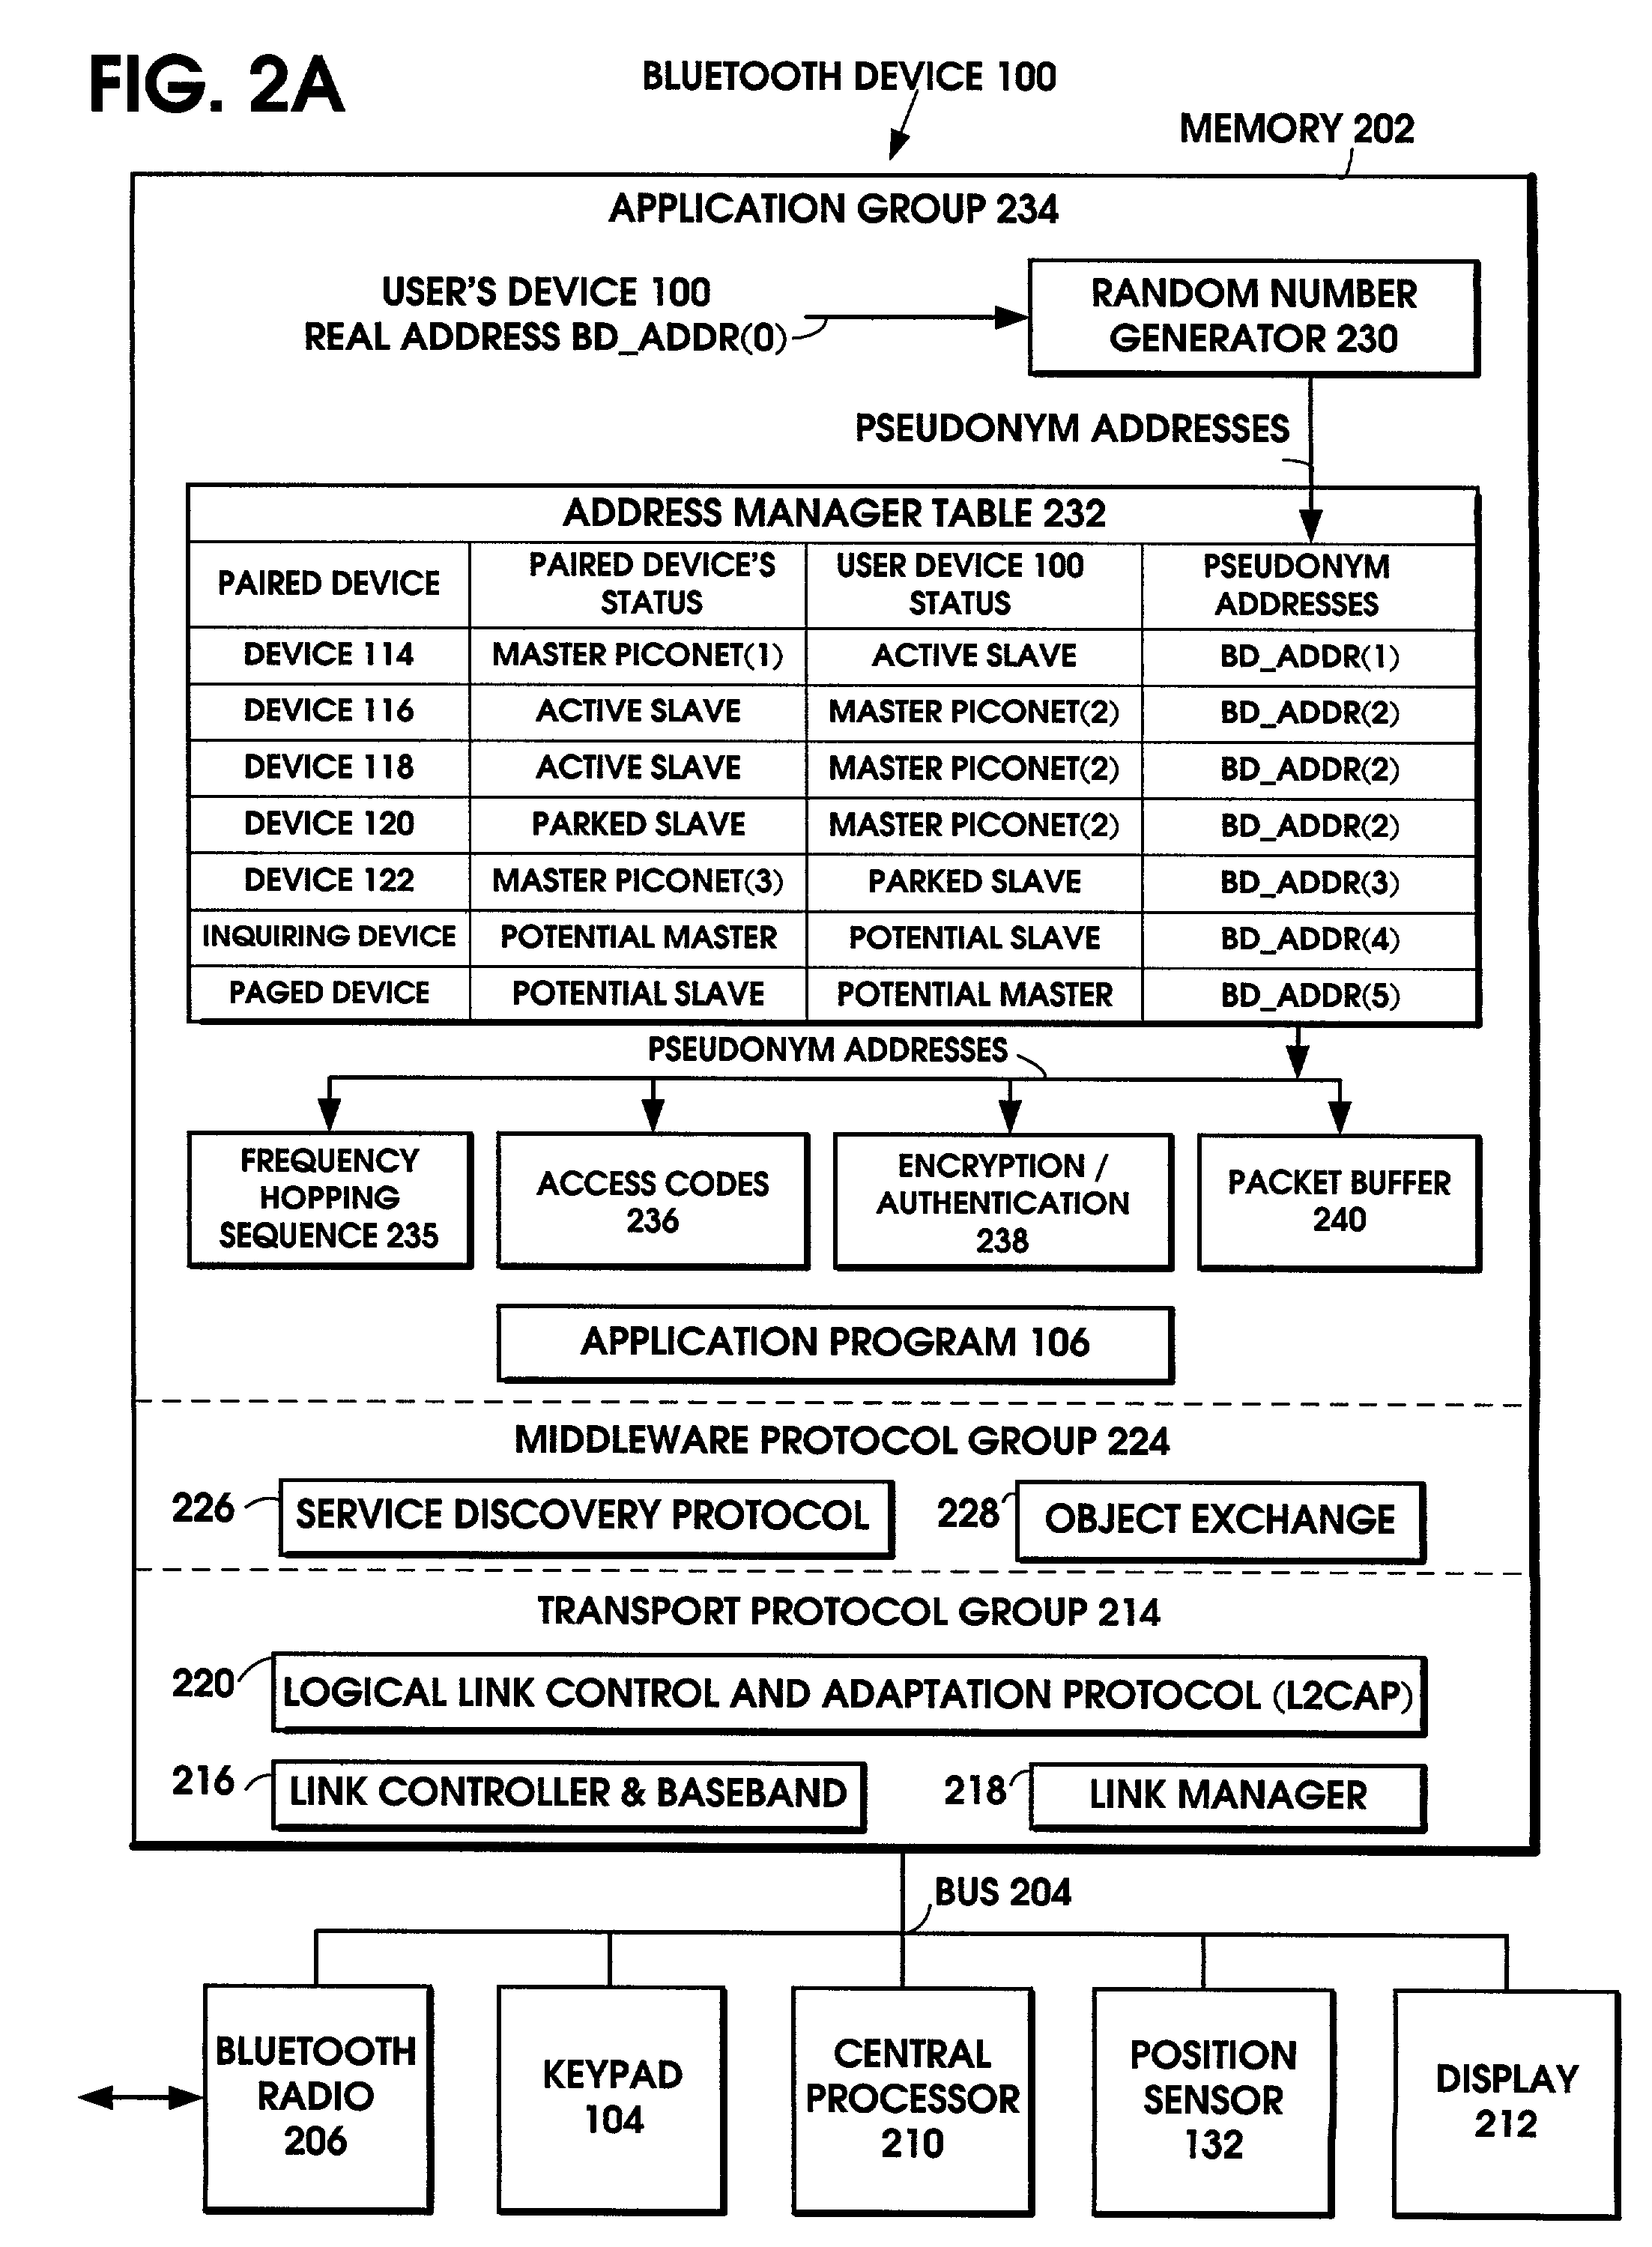 Method for protecting privacy when using a Bluetooth device